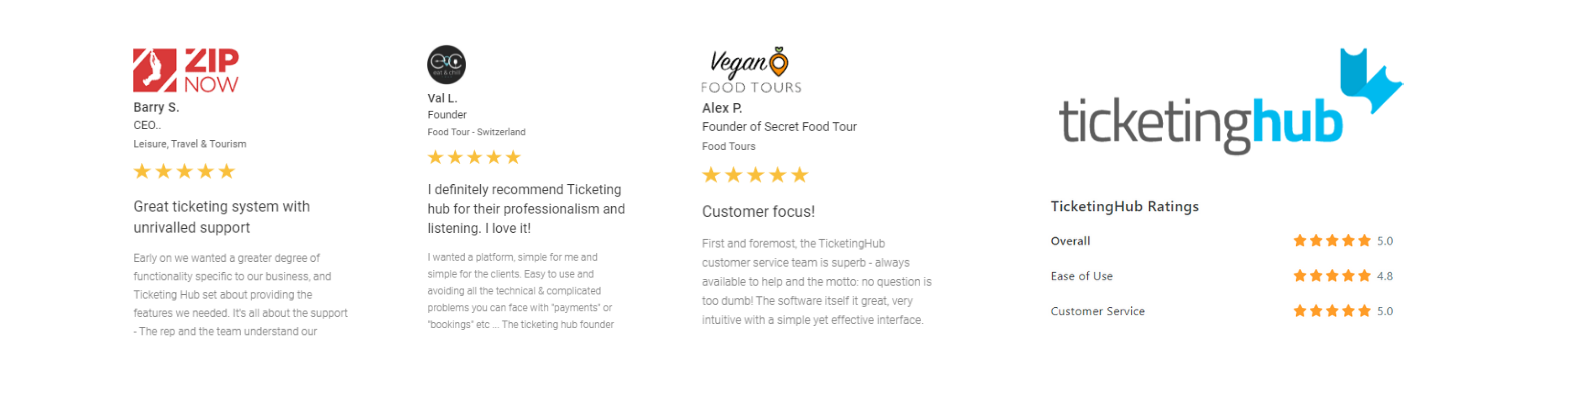 5 star customer reviews, better operations, tour booking software, more bookings, more customers